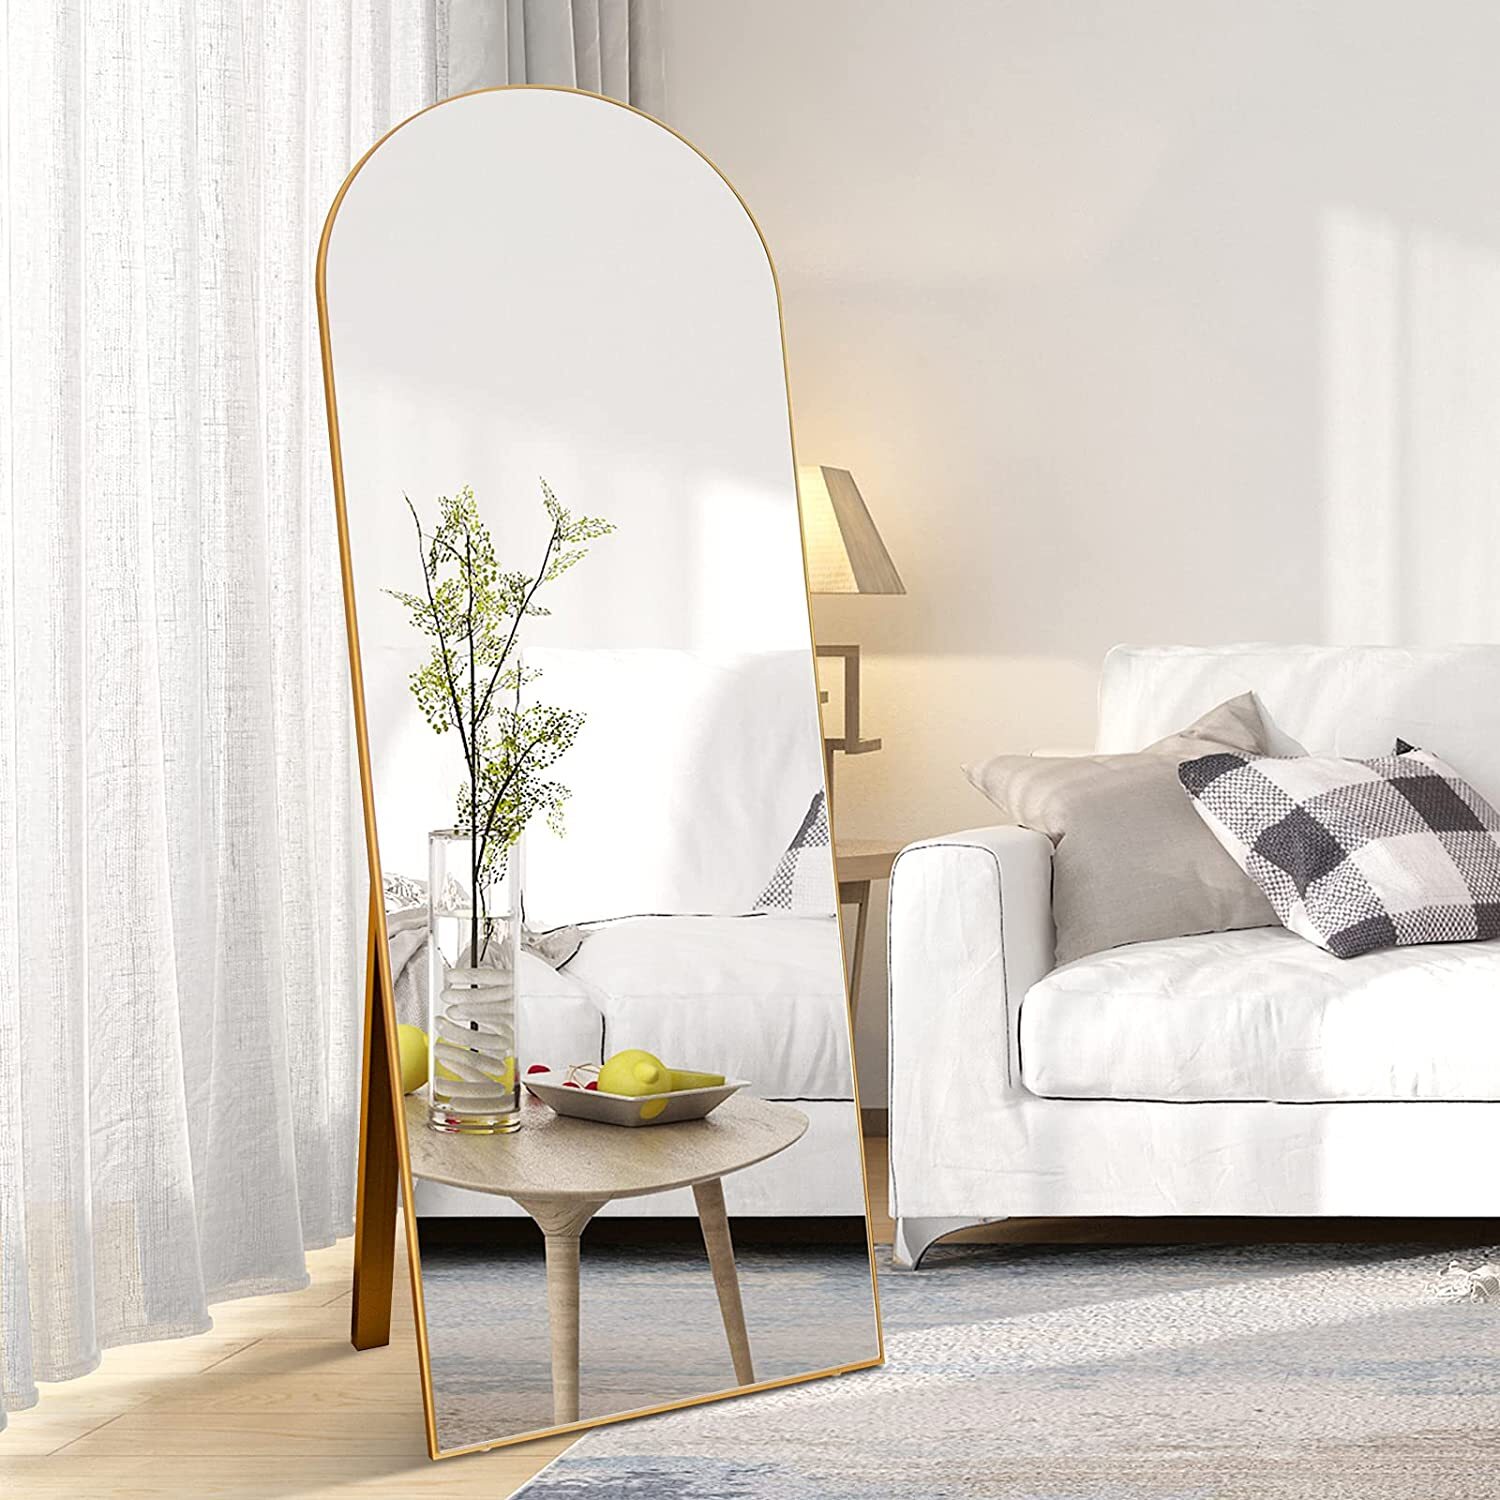 CONGUILIAO Full Length Mirror